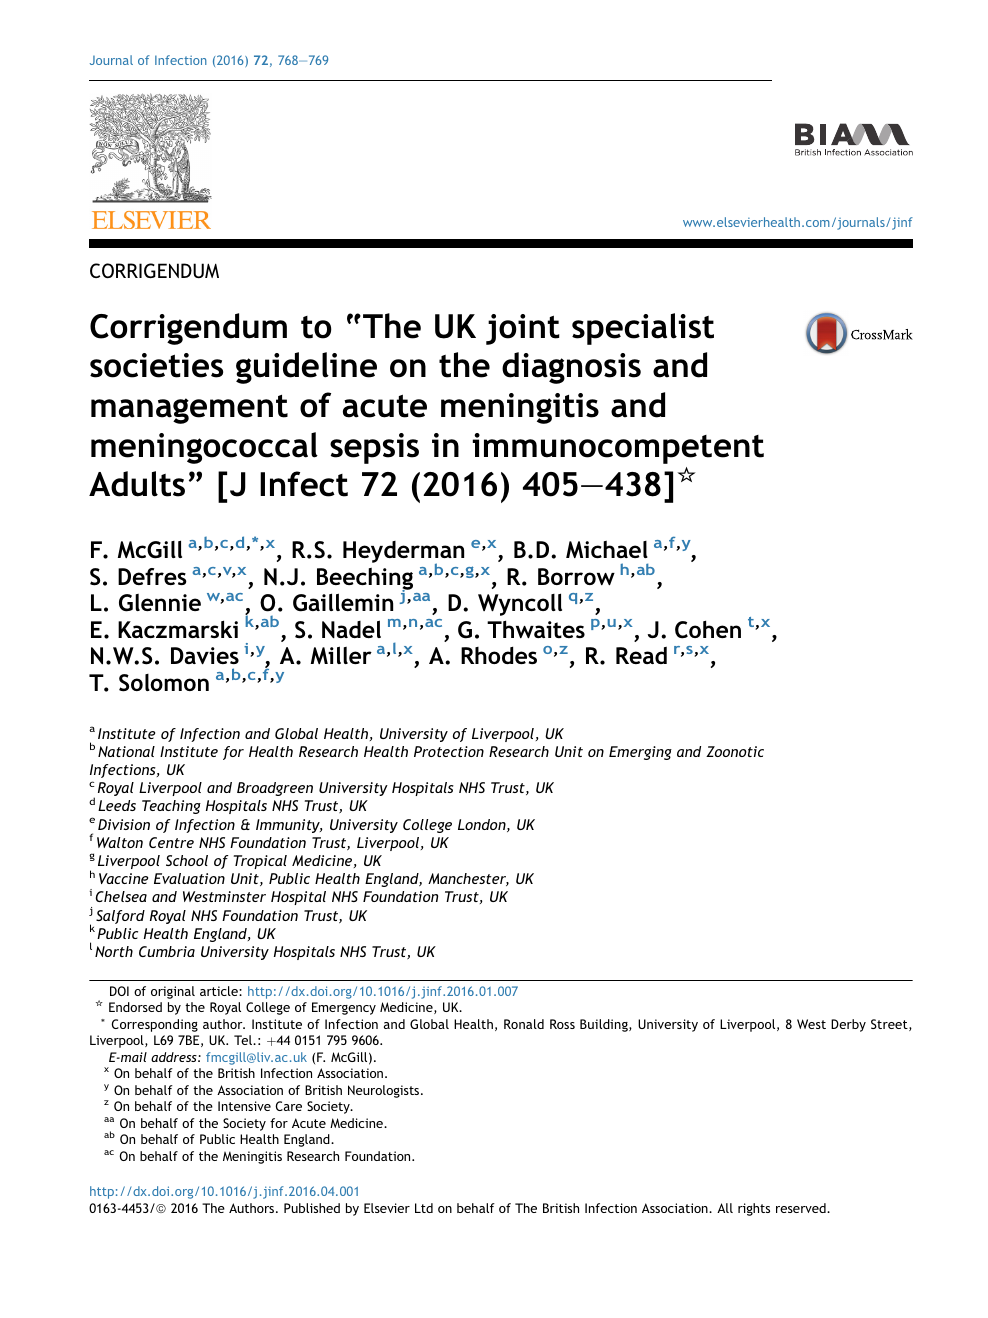 Corrigendum To The Uk Joint Specialist Societies Guideline On The Diagnosis And Management Of Acute Meningitis And Meningococcal Sepsis In Immunocompetent Adults J Infect 72 16 405 438 Topic Of Research Paper